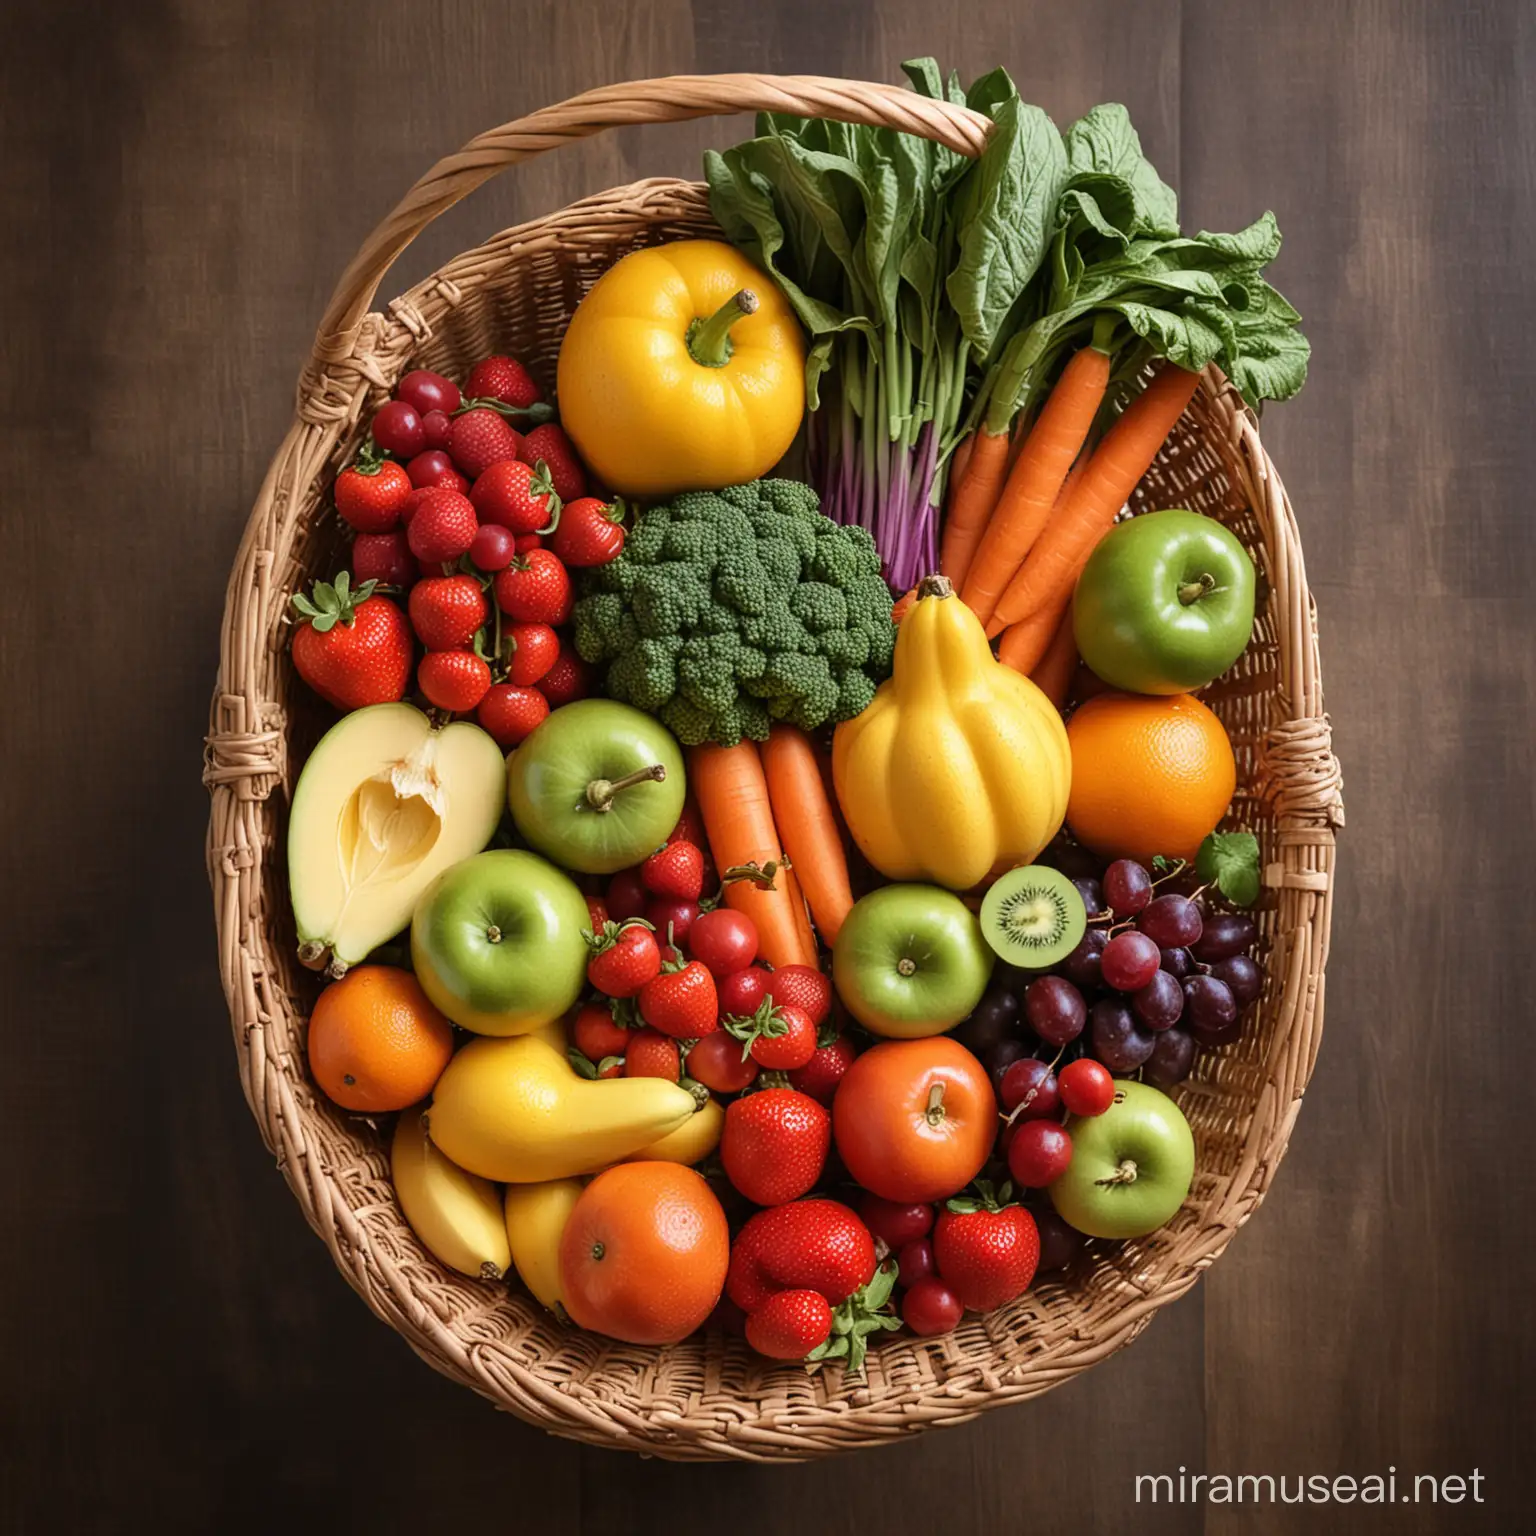 Assorted Fresh Fruits and Vegetables in a Woven Basket